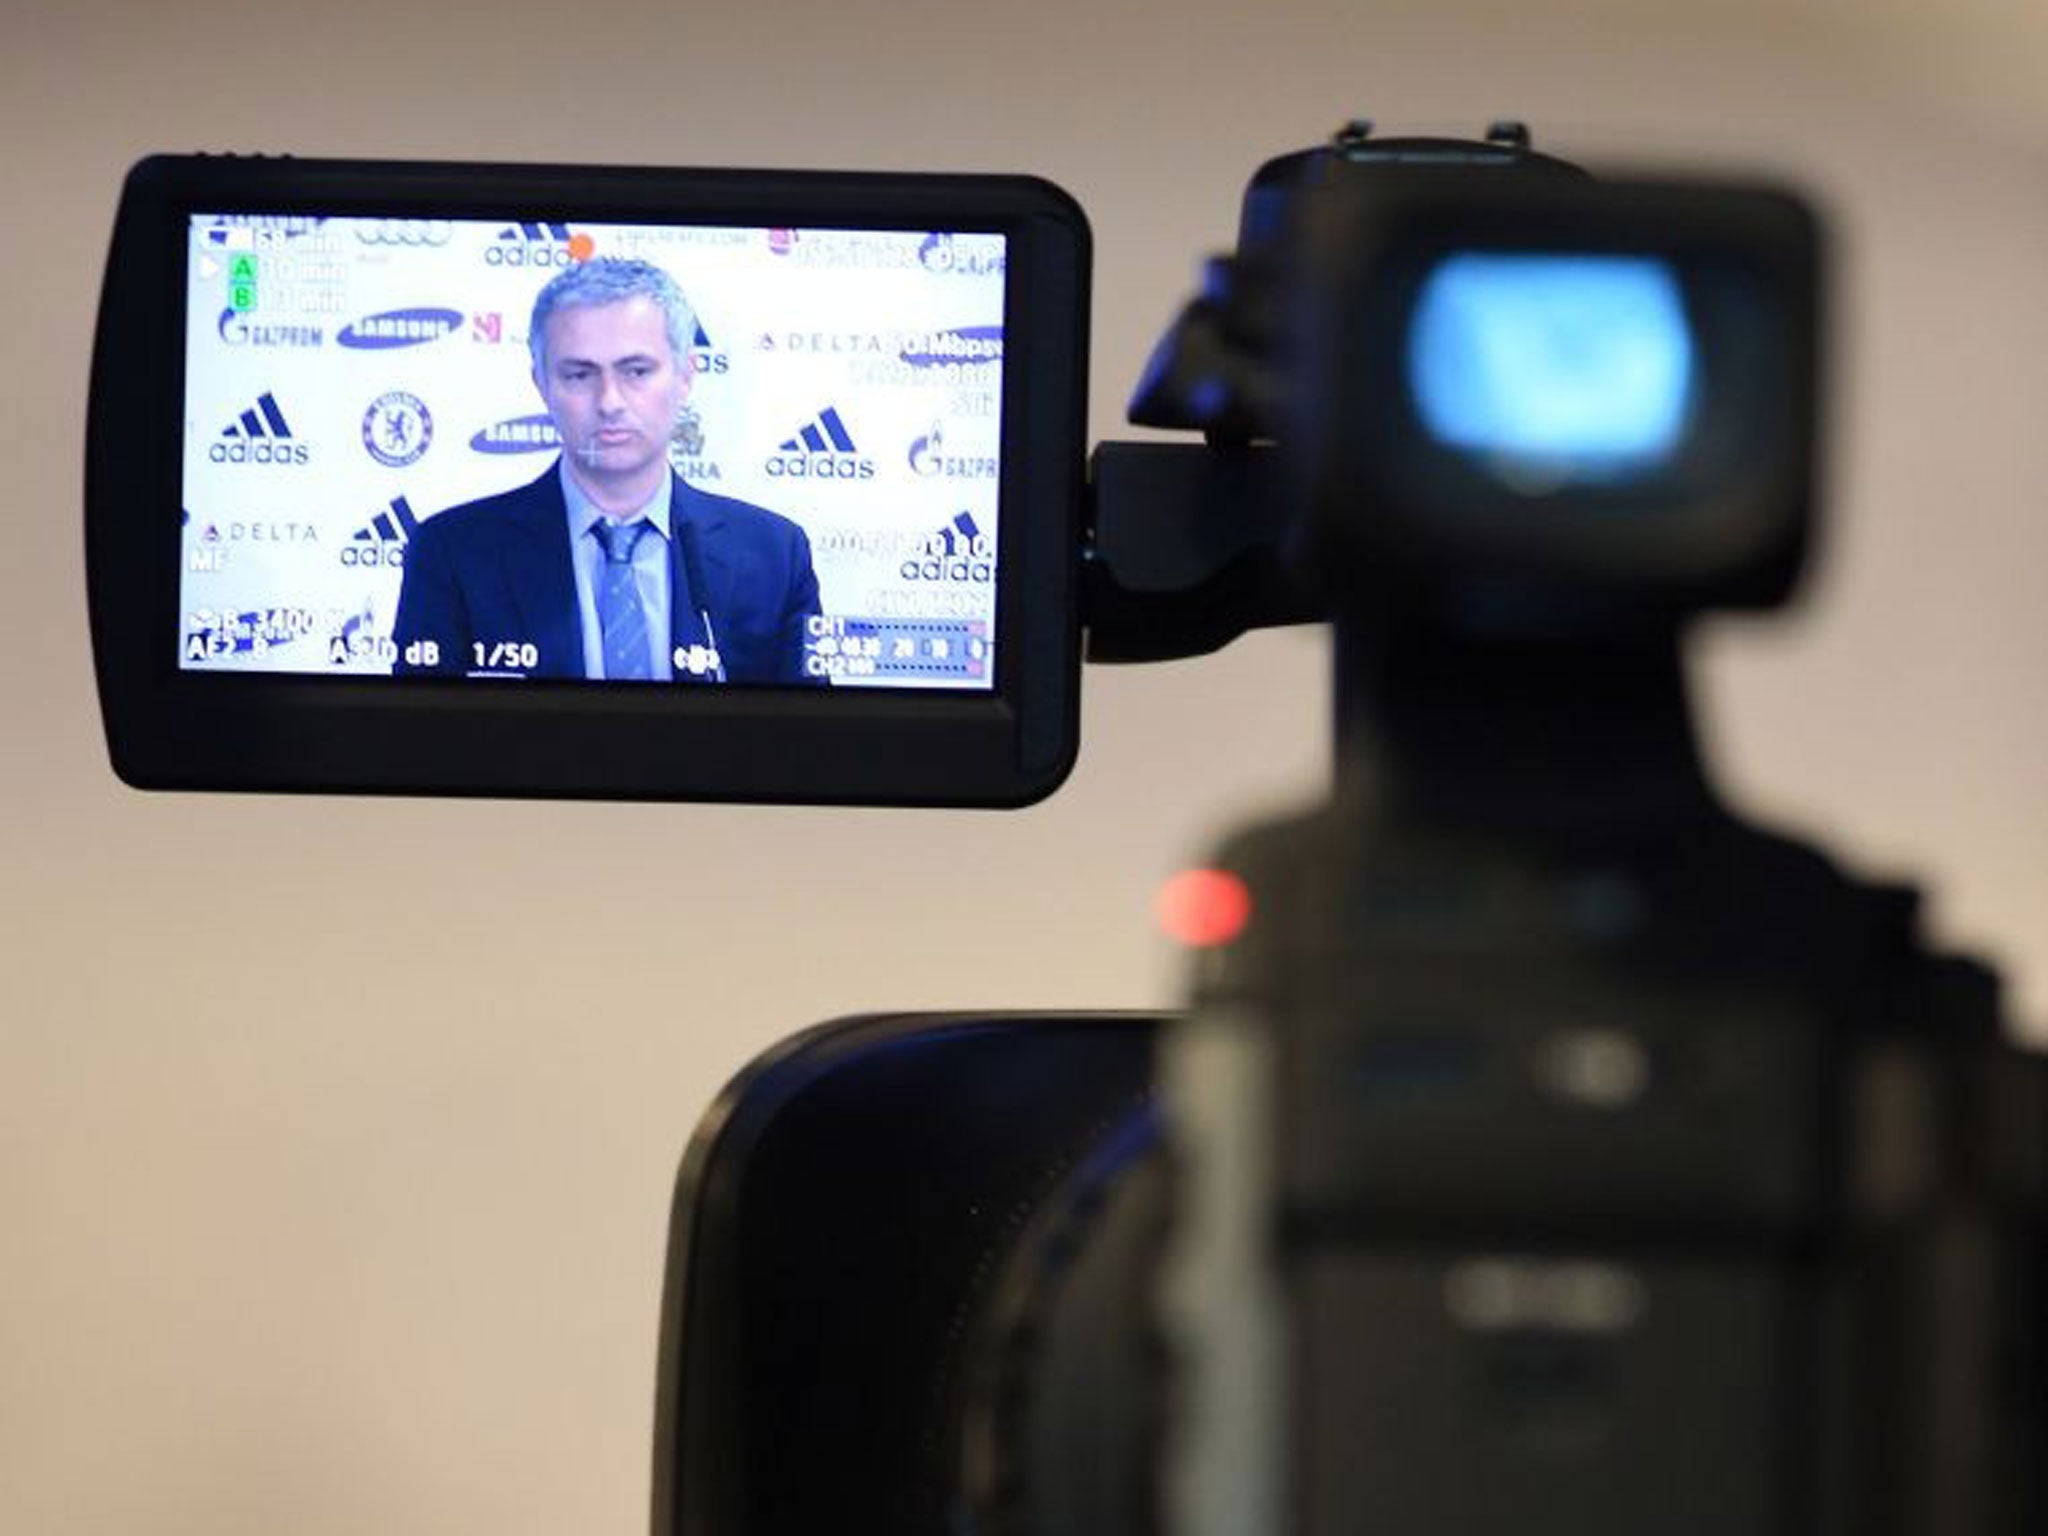 New Chelsea manager Jose Mourinho talks to the media during the Chealsea FC press conference at Stamford Bridge (Getty Images)